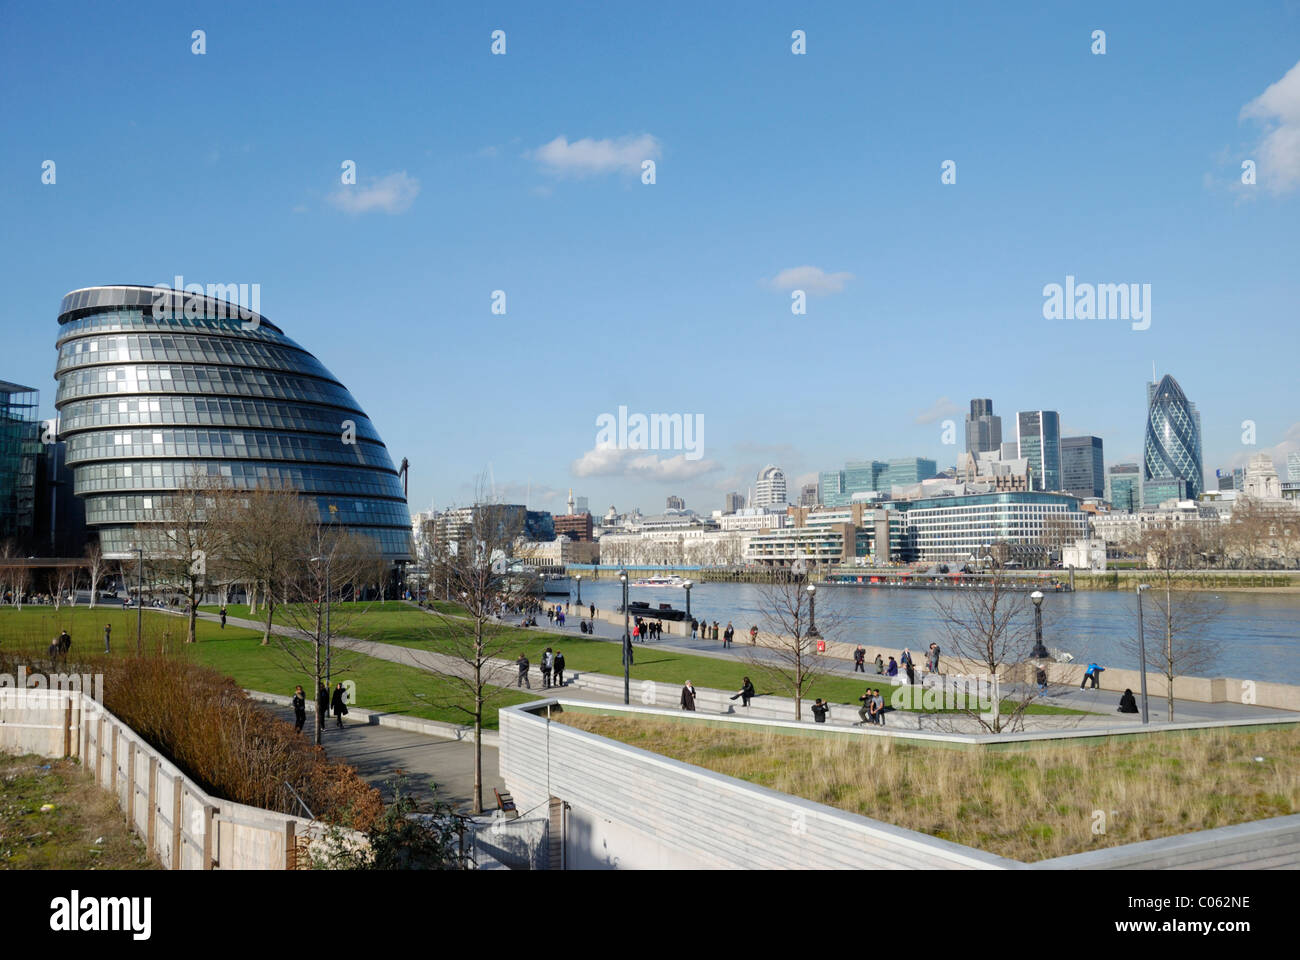 The GLA headquarters, River Thames and City of London, London, England Stock Photo